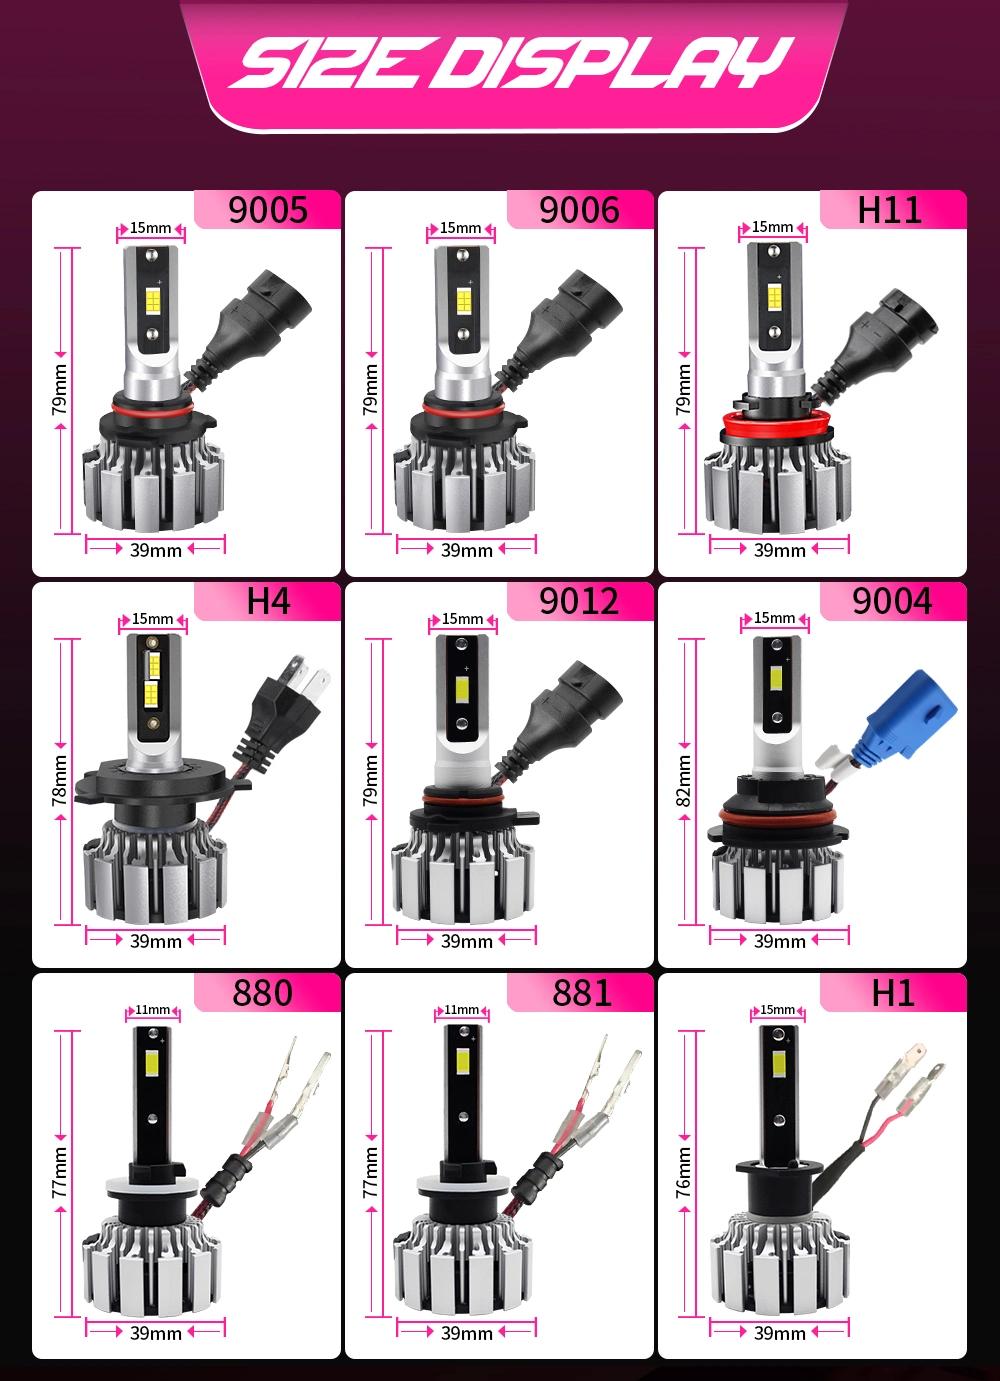 2022 T1s Turbo LED Kit 100W 20000lm T3 LED Headlight Bulbs H1h4 H7 H13 9004 9005 with 6000K H/L Beam Lamp for Motorcycle Car